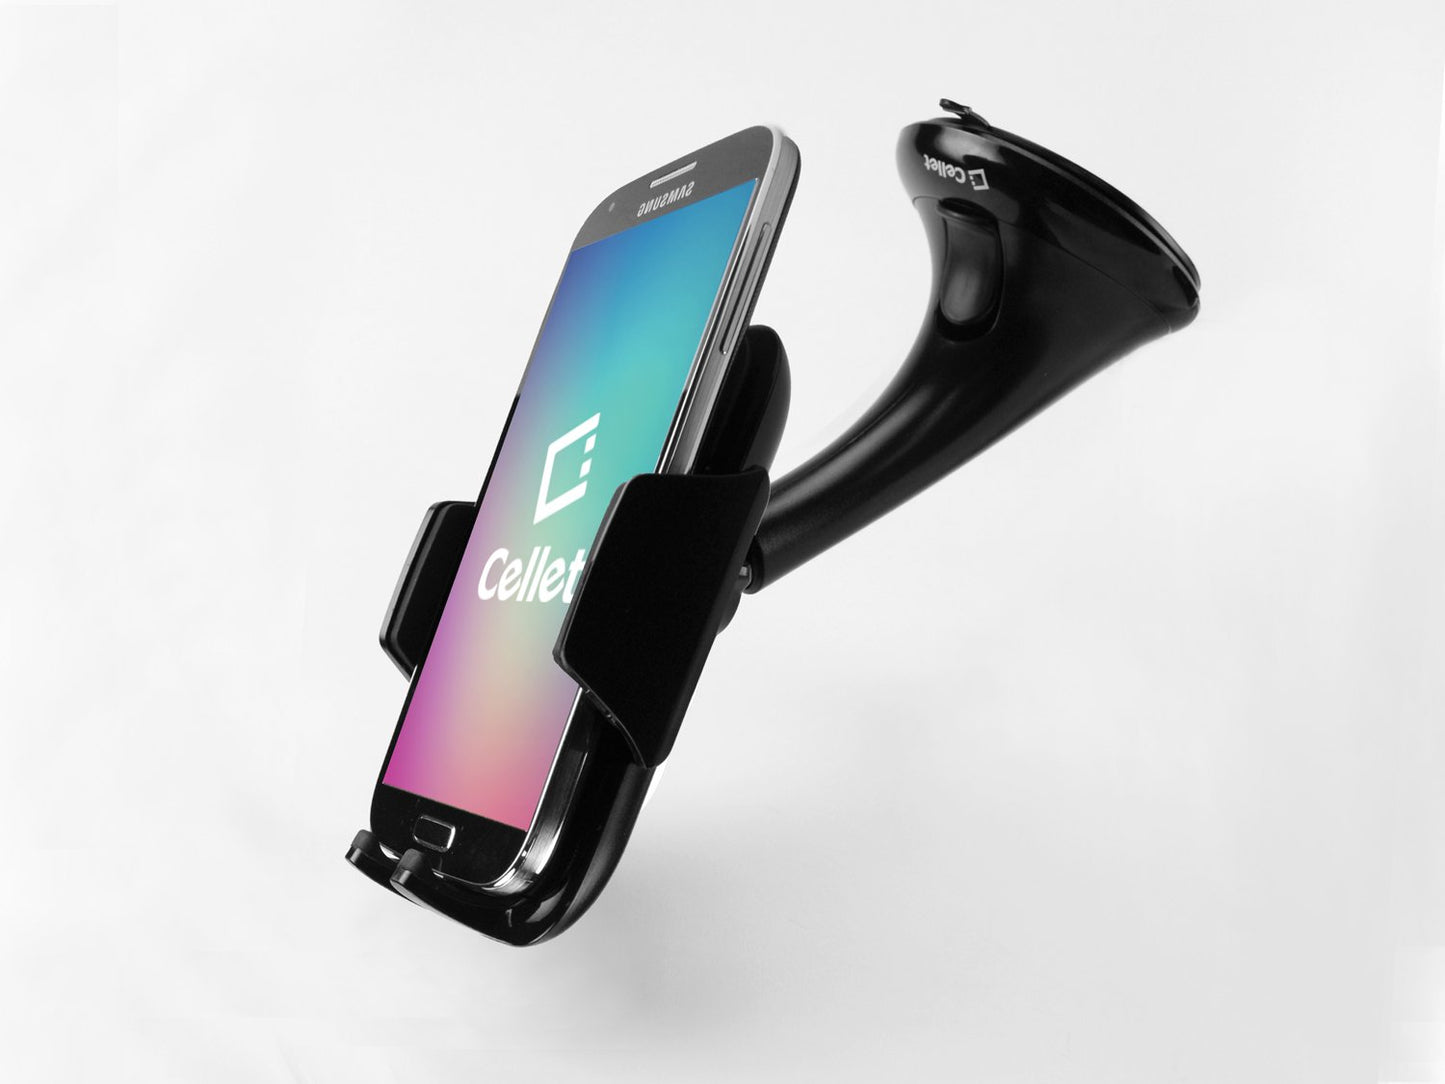 PH675BK - Car Windshield and Dashboard Phone Holder Mount, Secure Grip Universal Compatibility